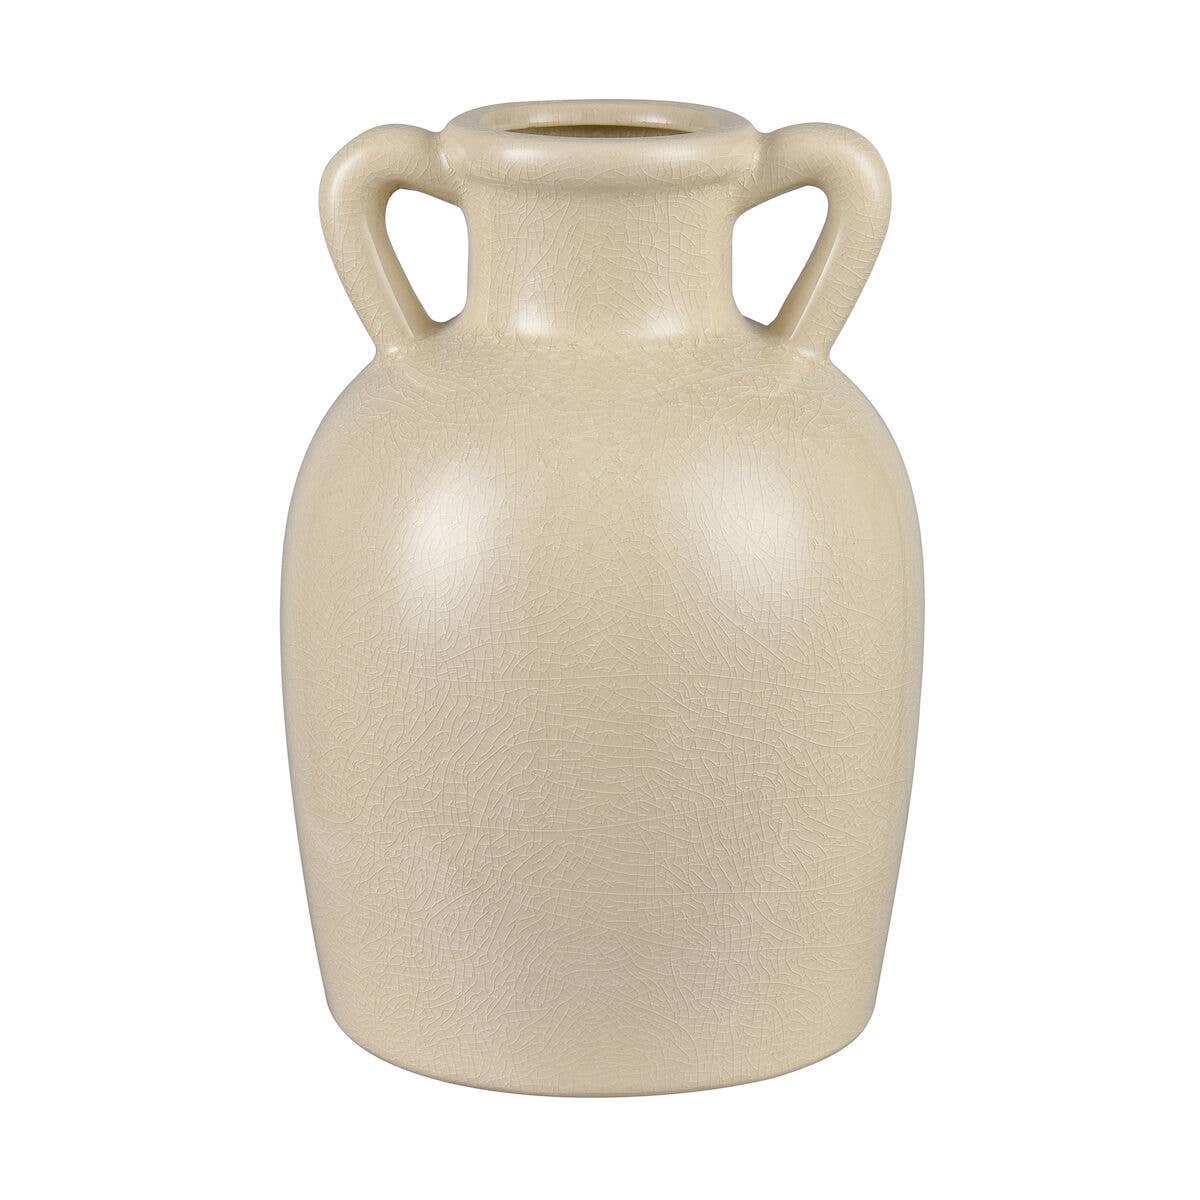 Load image into Gallery viewer, Babin Amphora Style Glazed Ceramic Vase | Small
